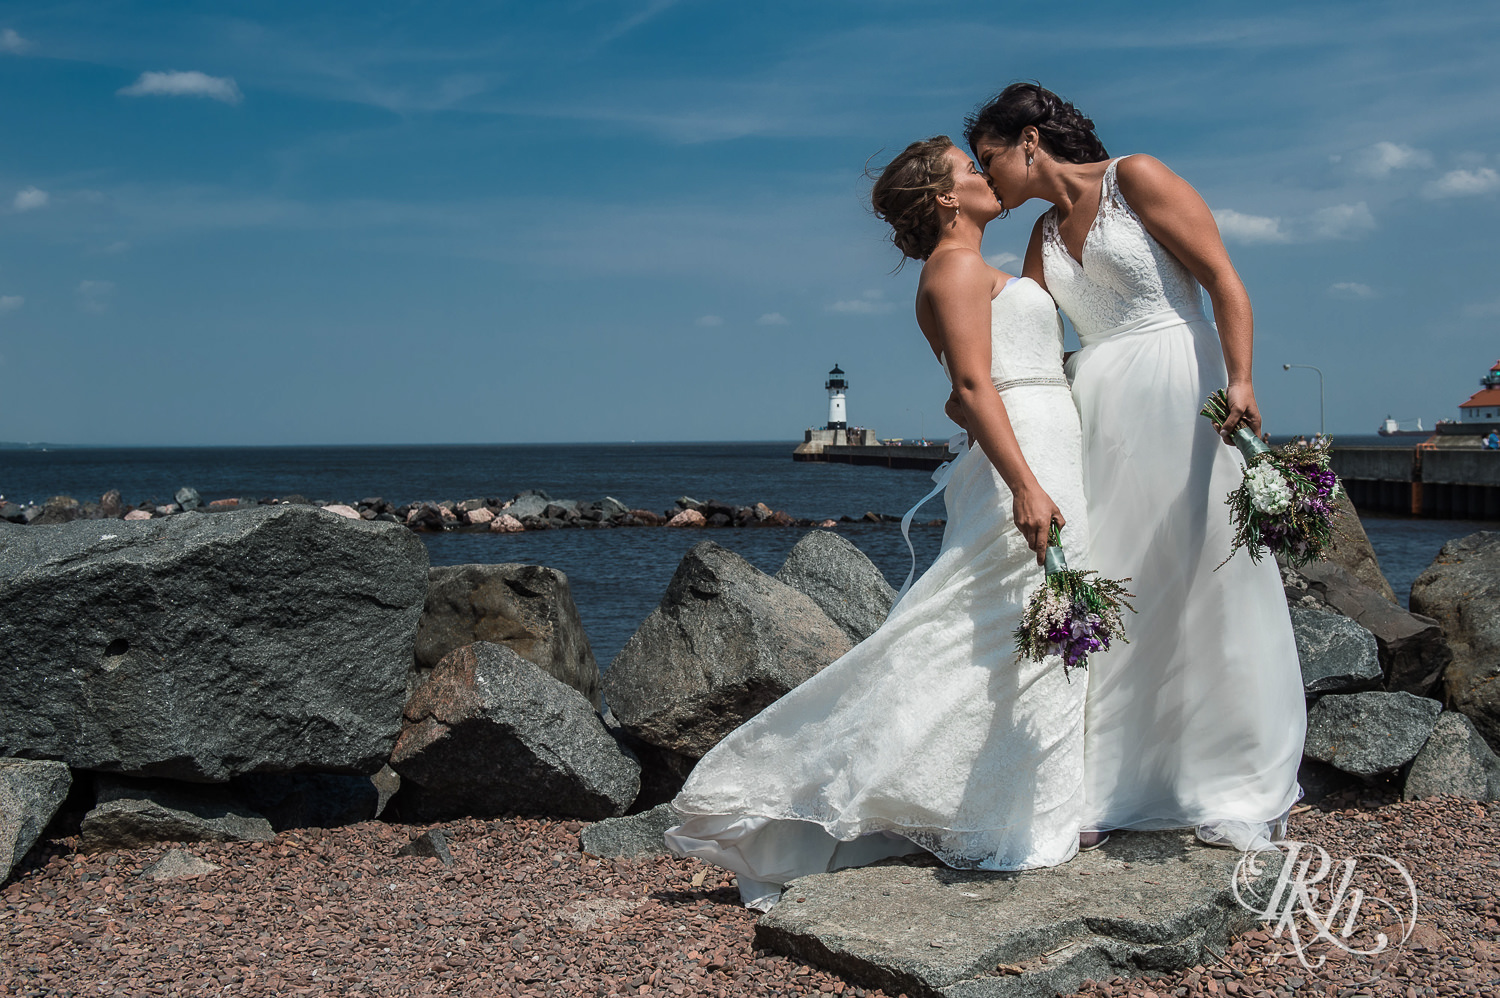 Lesbian brides kiss on the shore of Lake Superior in Duluth, Minnesota.